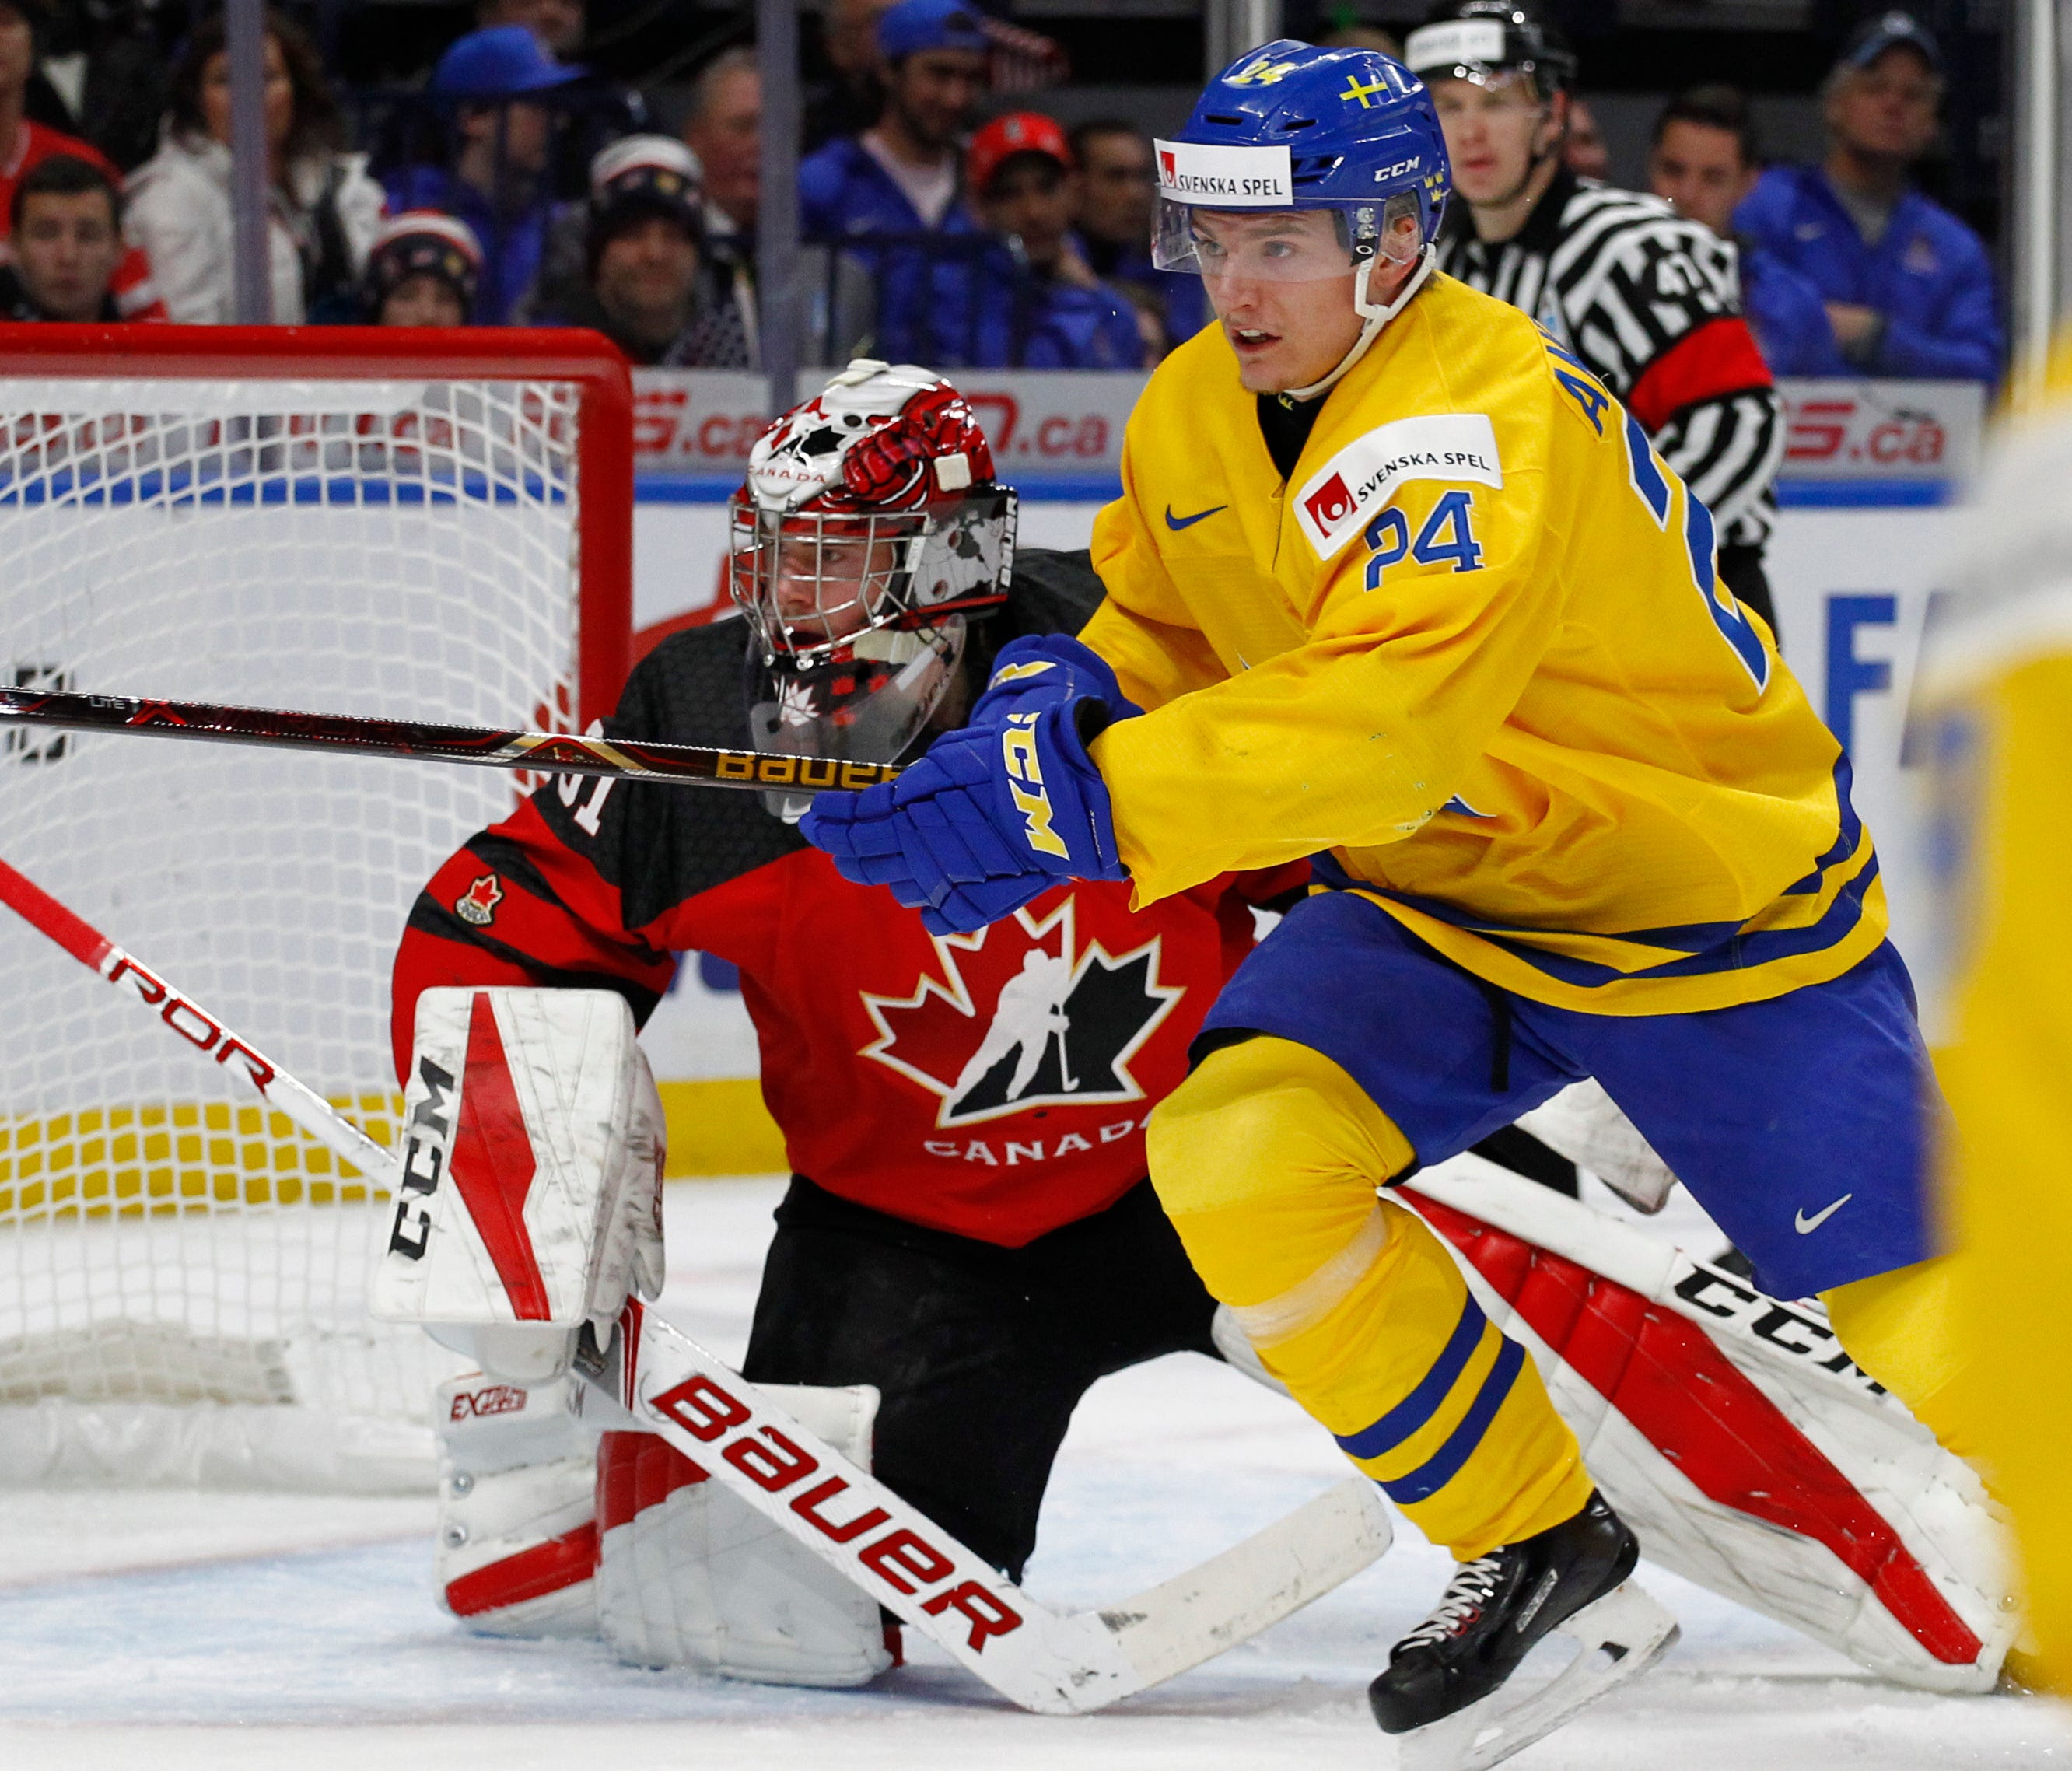 Sweden forward Lias Andersson led his team with six goals at the world junior championships.